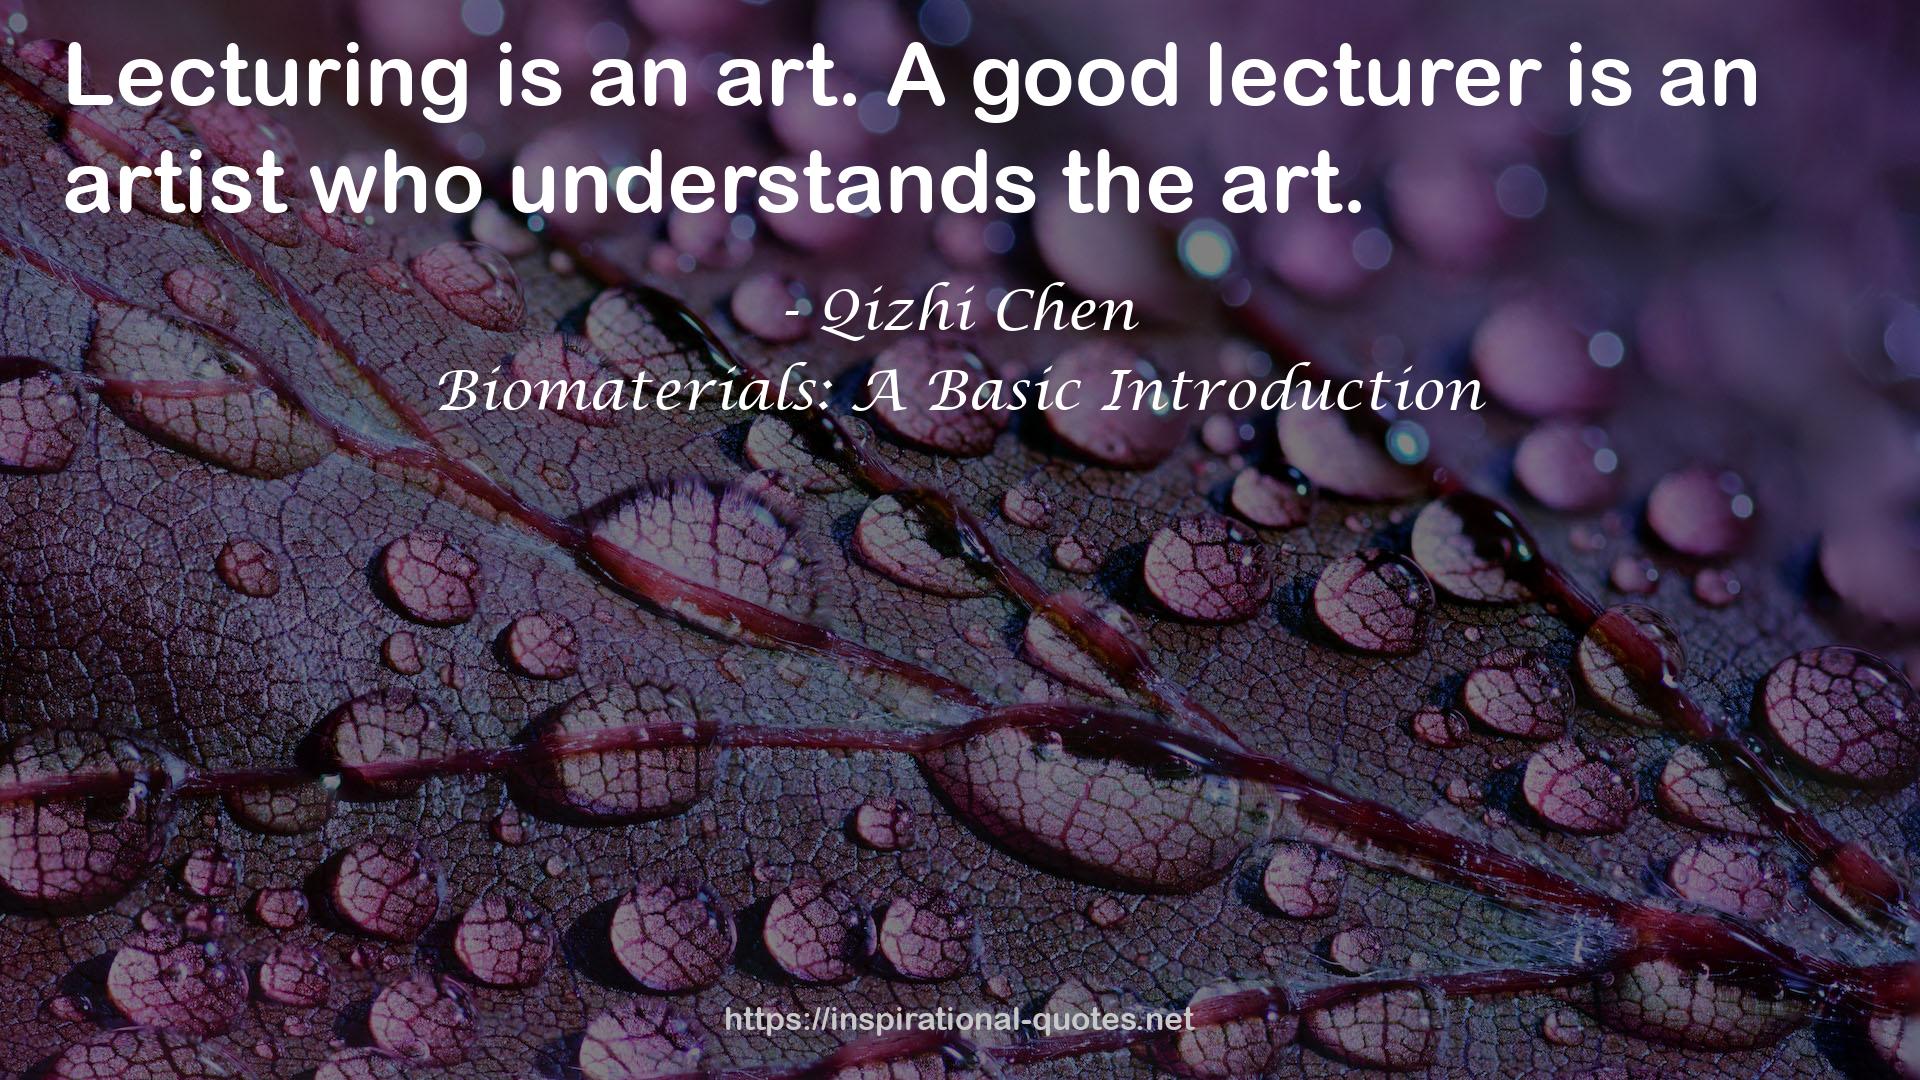 Biomaterials: A Basic Introduction QUOTES